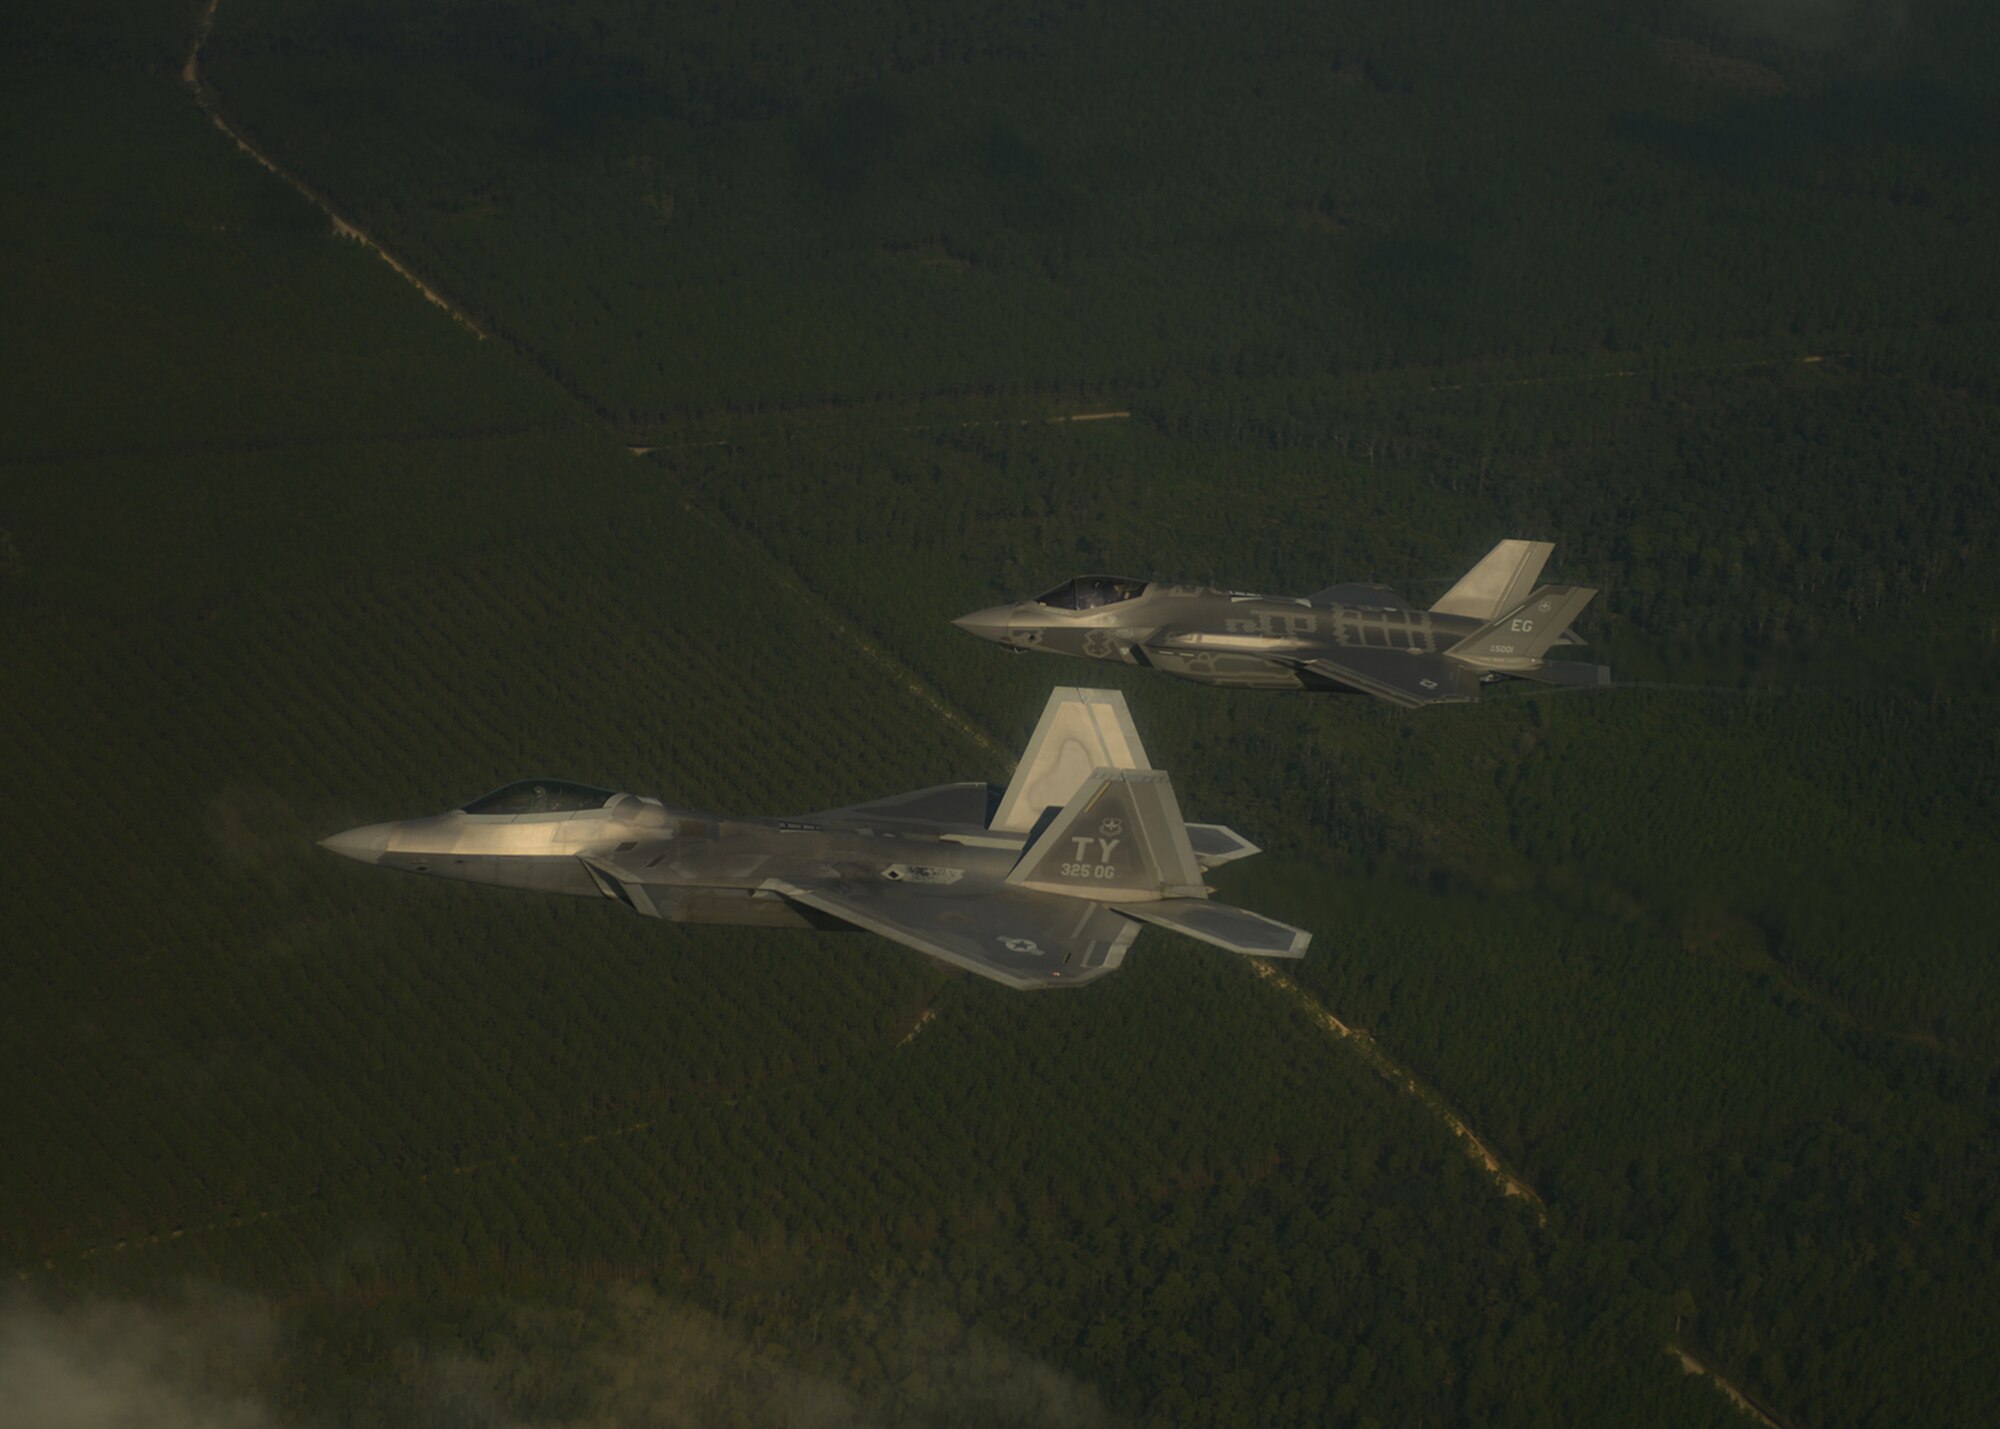 An F-22A Raptor, foreground, from the 43rd Fighter Squadron at Tyndall Air Force Base, Fla., and an F-35A Lightning II joint strike fighter from the 33rd Fighter Wing at Eglin Air Force Base, Fla., soar over the Emerald Coast Sept. 19, 2012. This was the first time the two fifth-generation fighters have flown together for the Air Force. (U.S. Air Force photo/Master Sgt. Jeremy T. Lock)